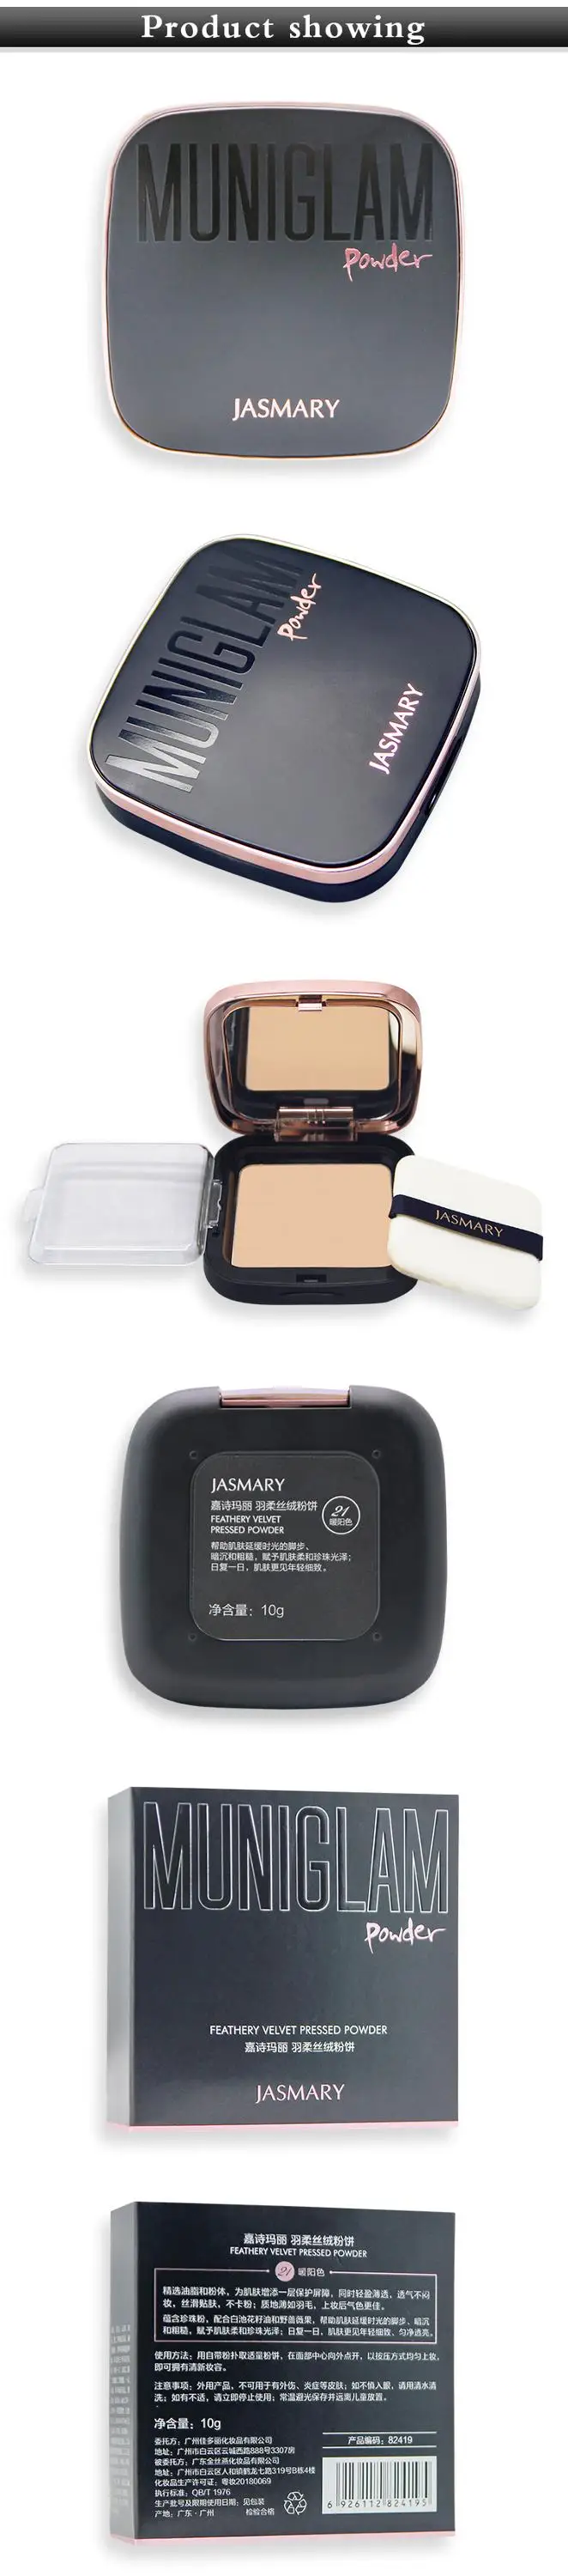 Makeup private label long lasting concealing whitening waterproof feature perfect pressed powder